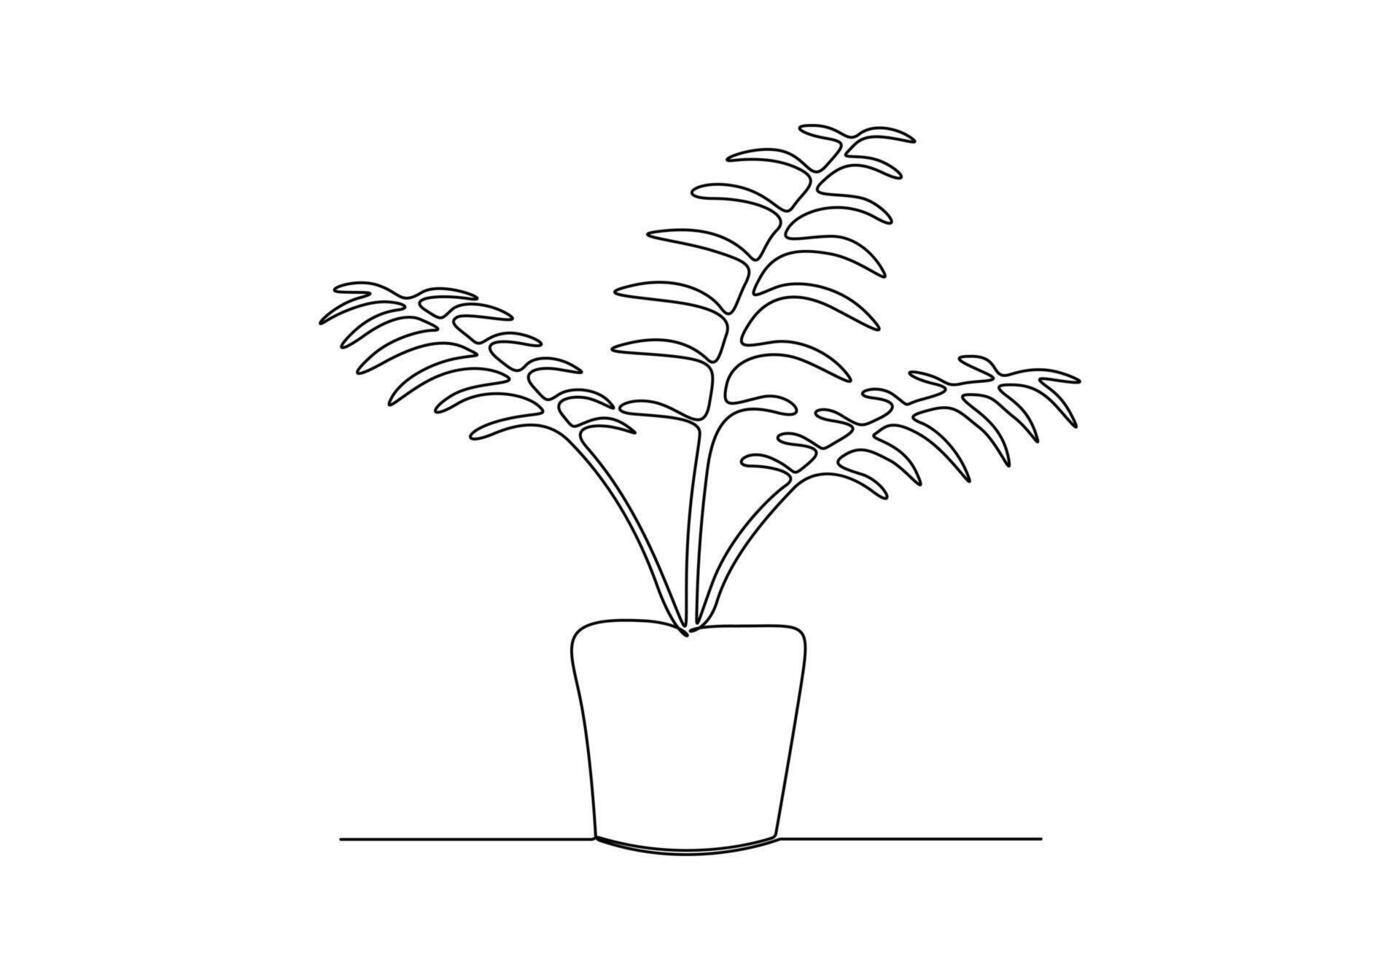 House plant in one continuous one line drawing vector illustration. Pro vector